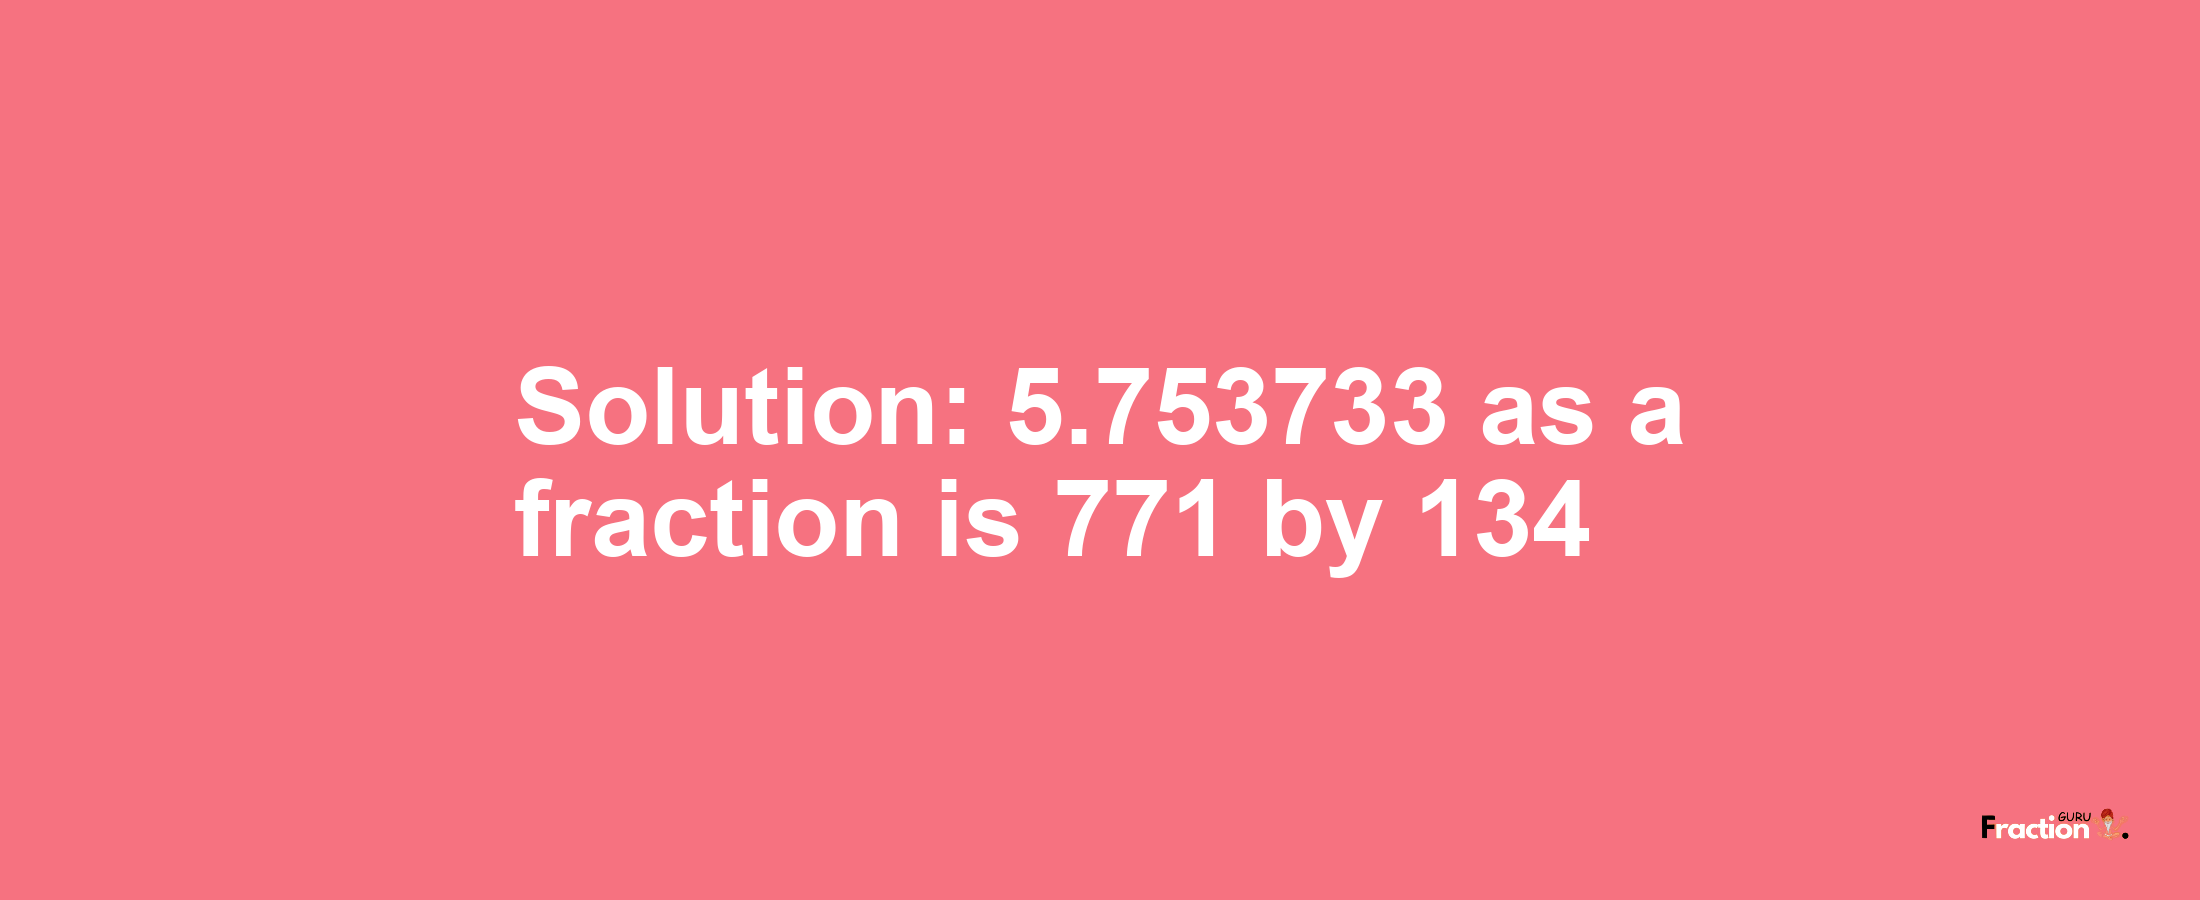 Solution:5.753733 as a fraction is 771/134